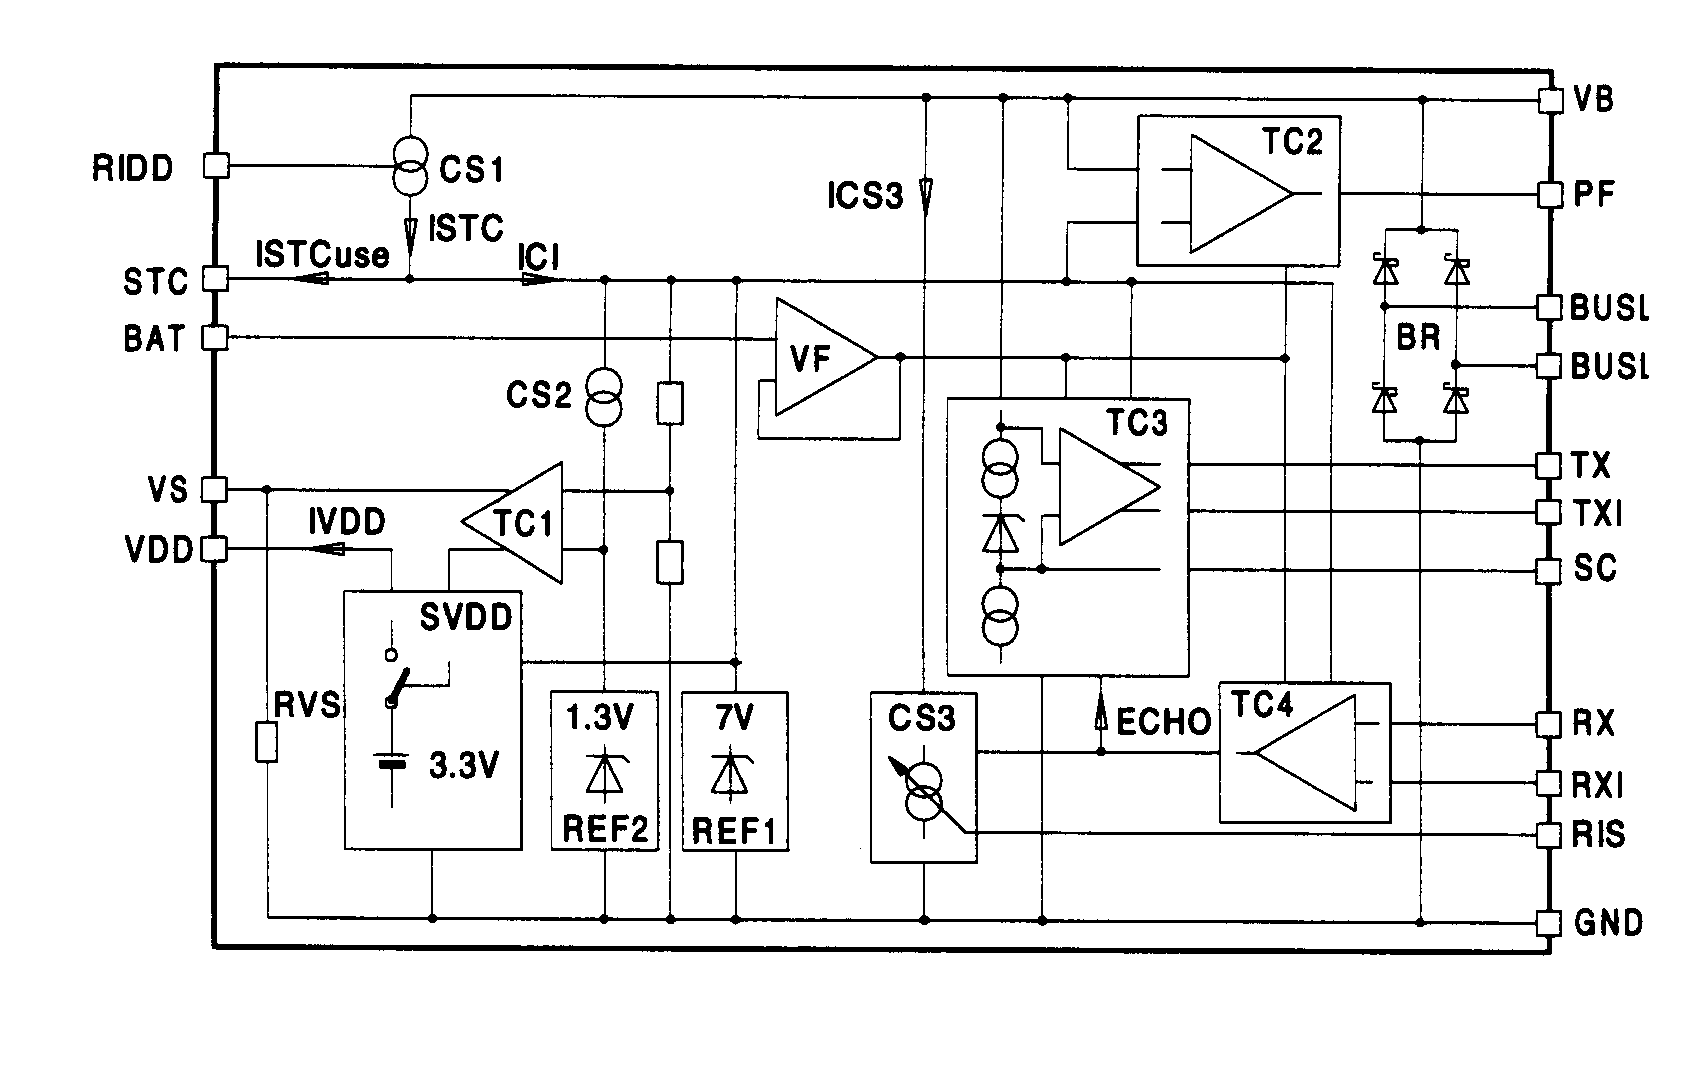 Fig. 10 Block Diagram of the Transceiver TSS721